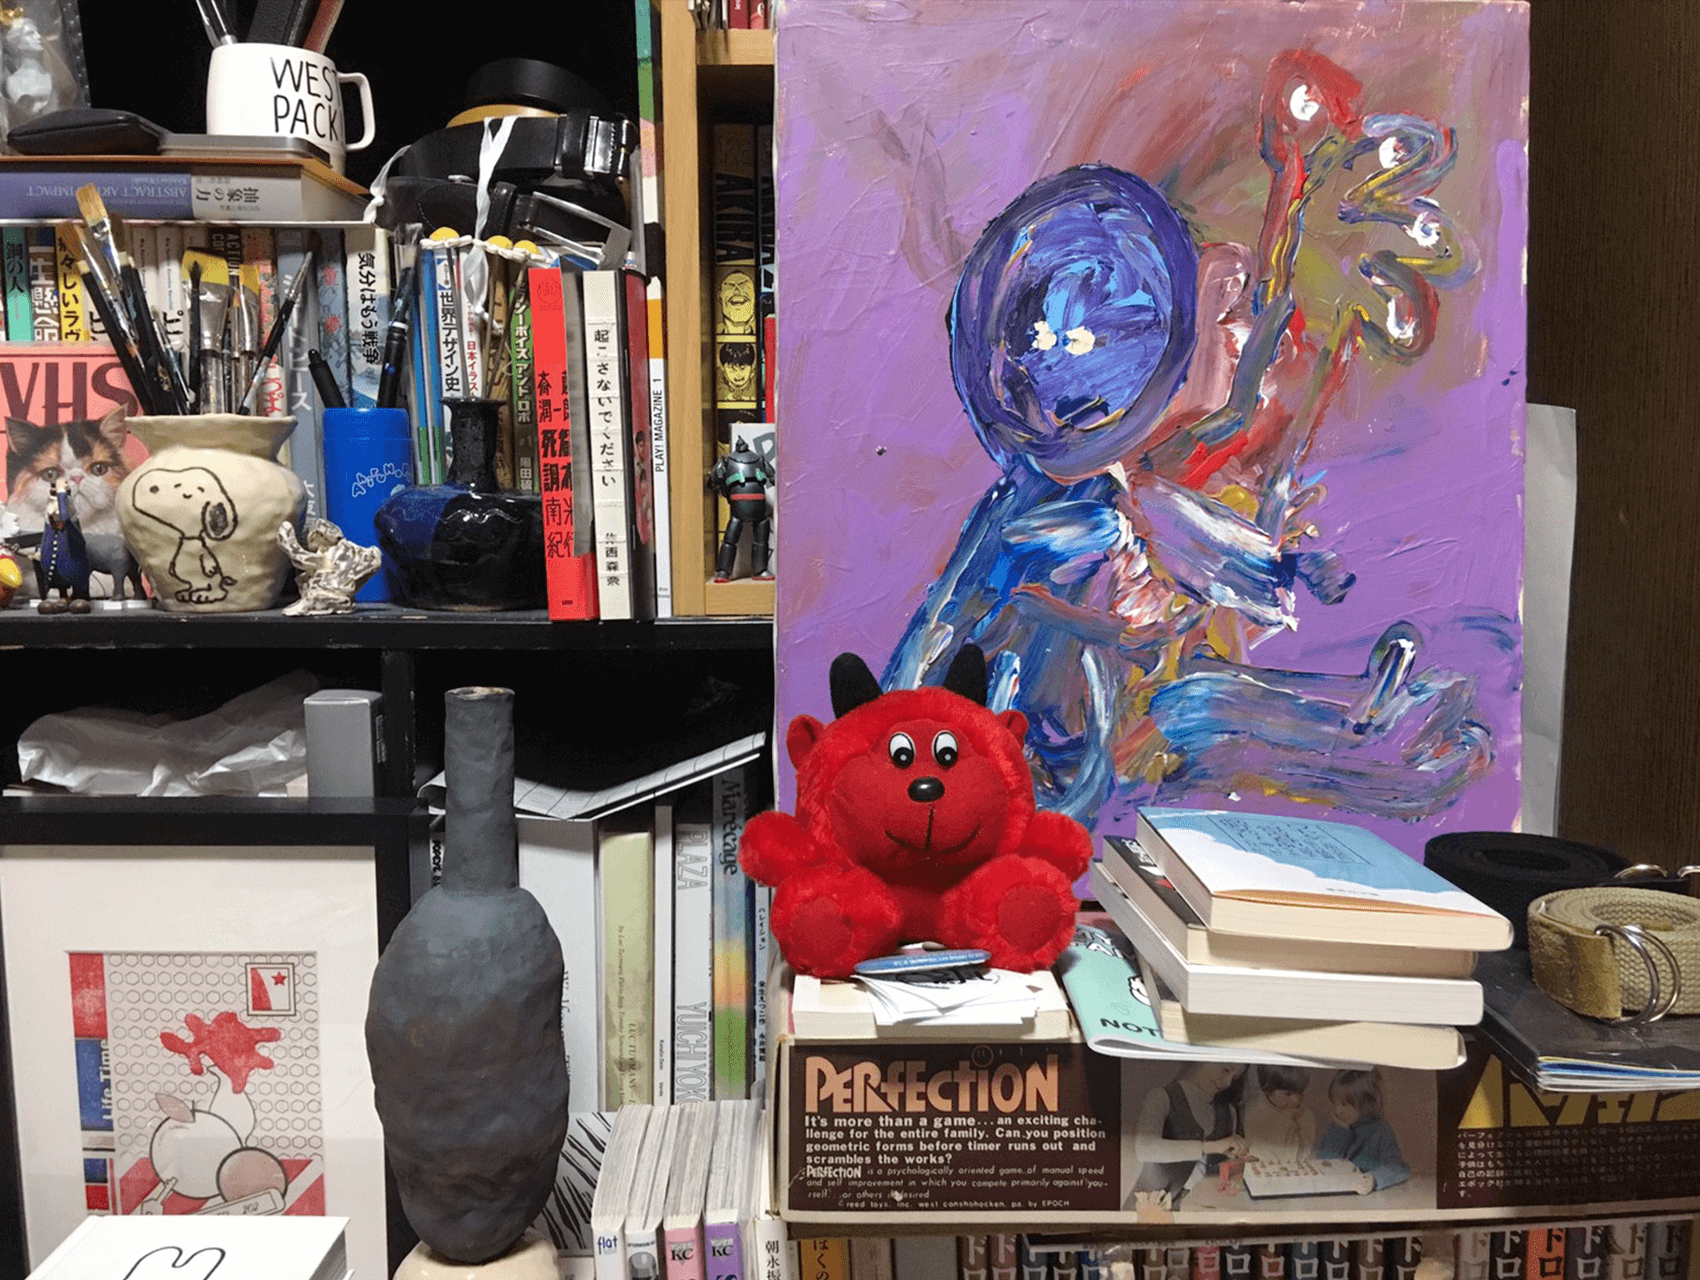 Top left, from left to right: Hamaguchi Ken, Tombo Sensei, my ceramics, vase and artificial flowers (itou), right: Nakamura Joji.